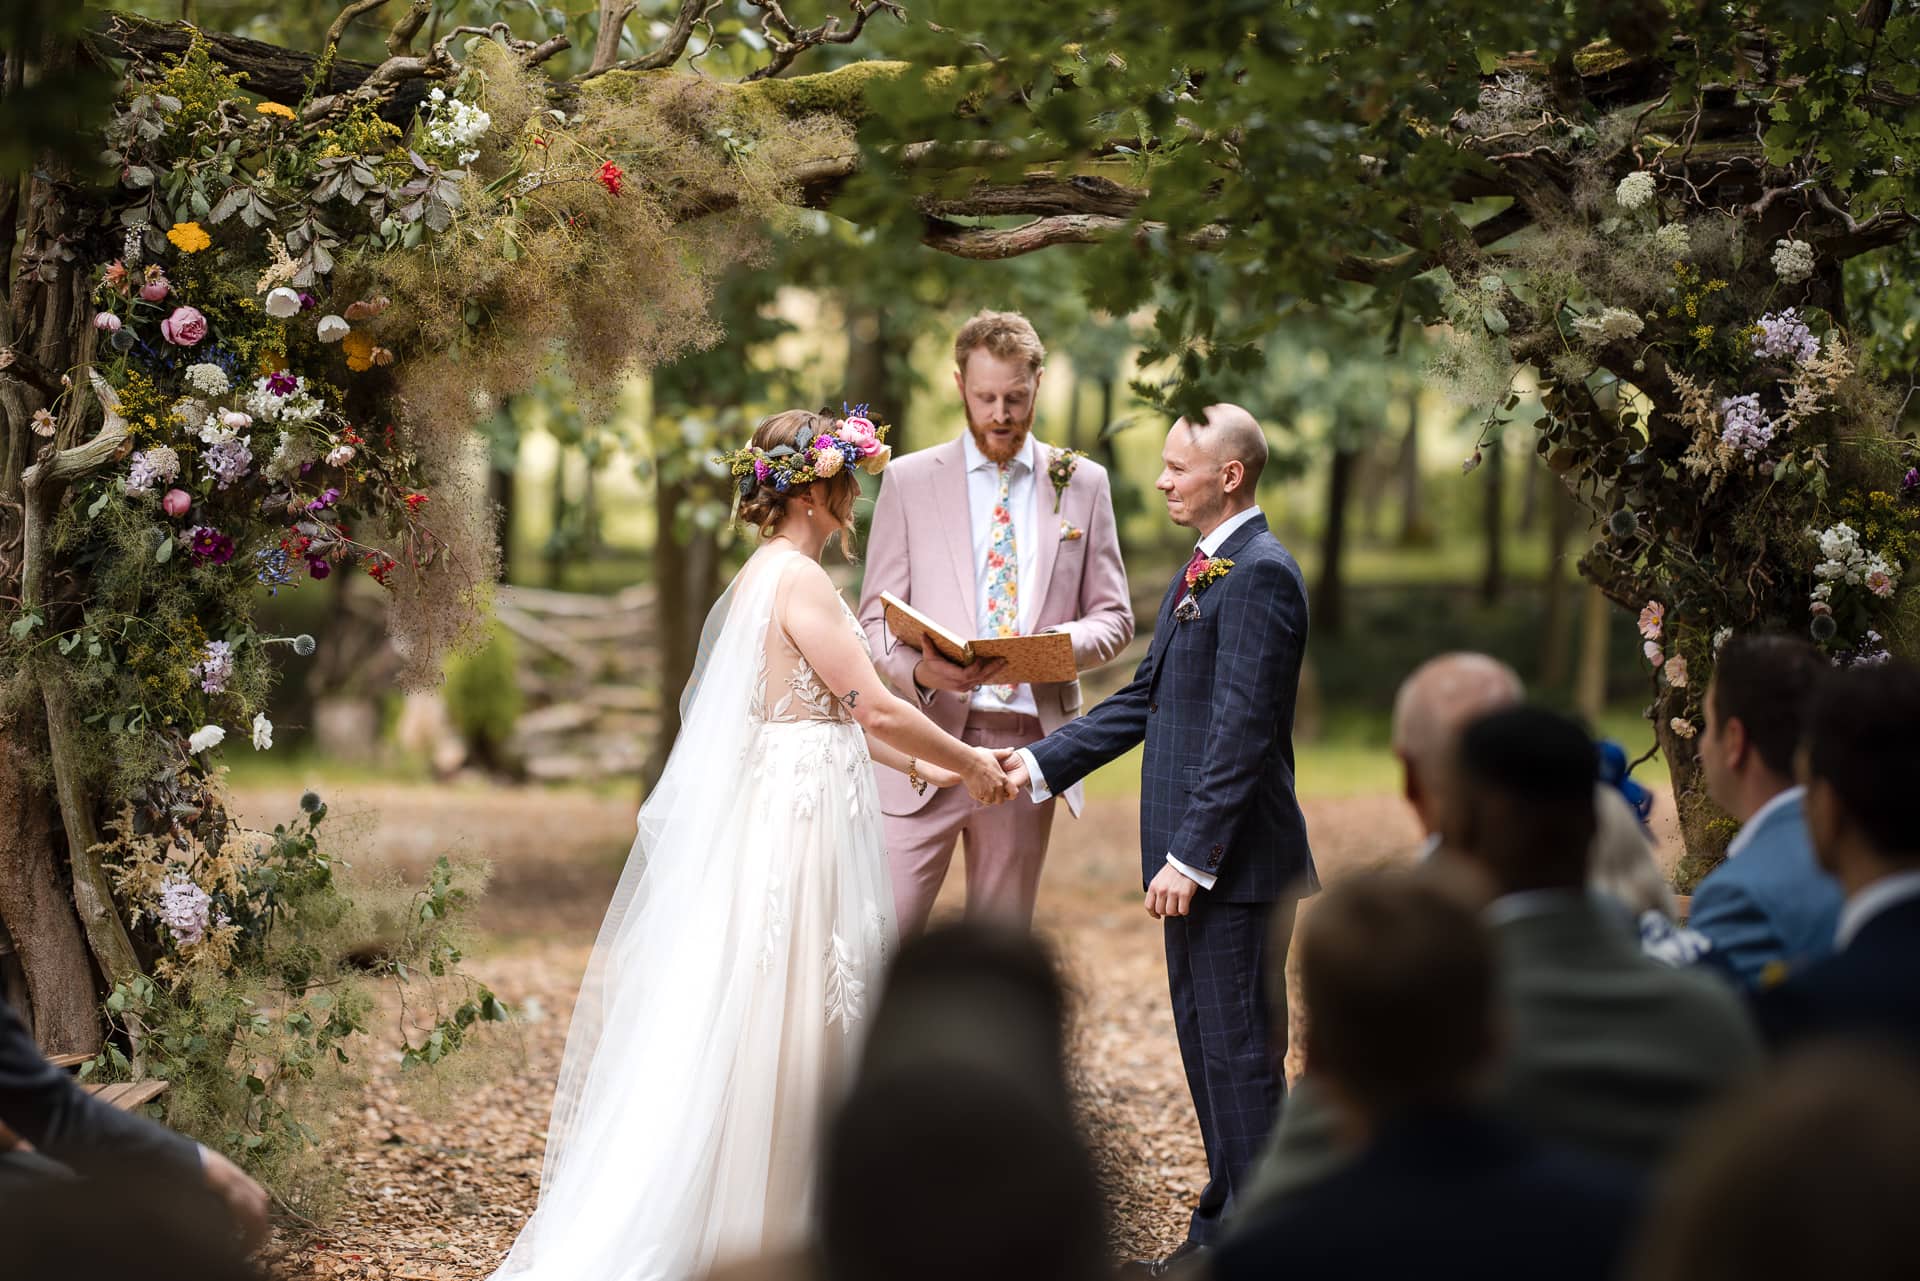 Outdoor Wedding cerement in the woodland at Endeavour Woodland wedding venue